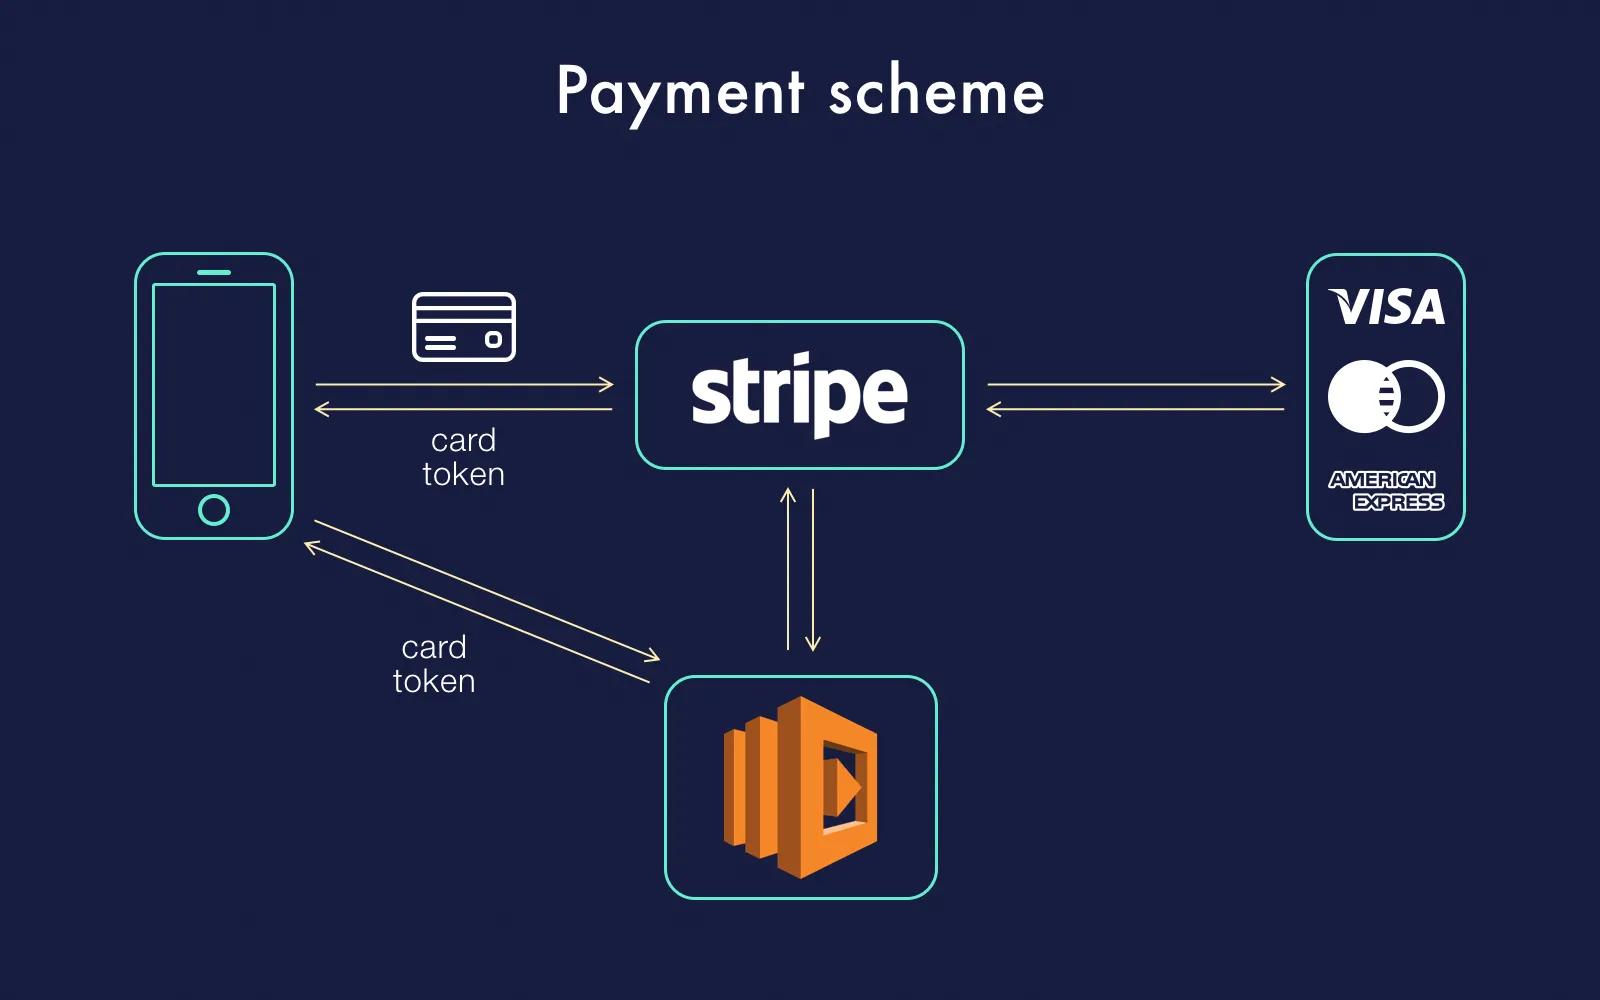 A scheme of simple payment process on Stripe